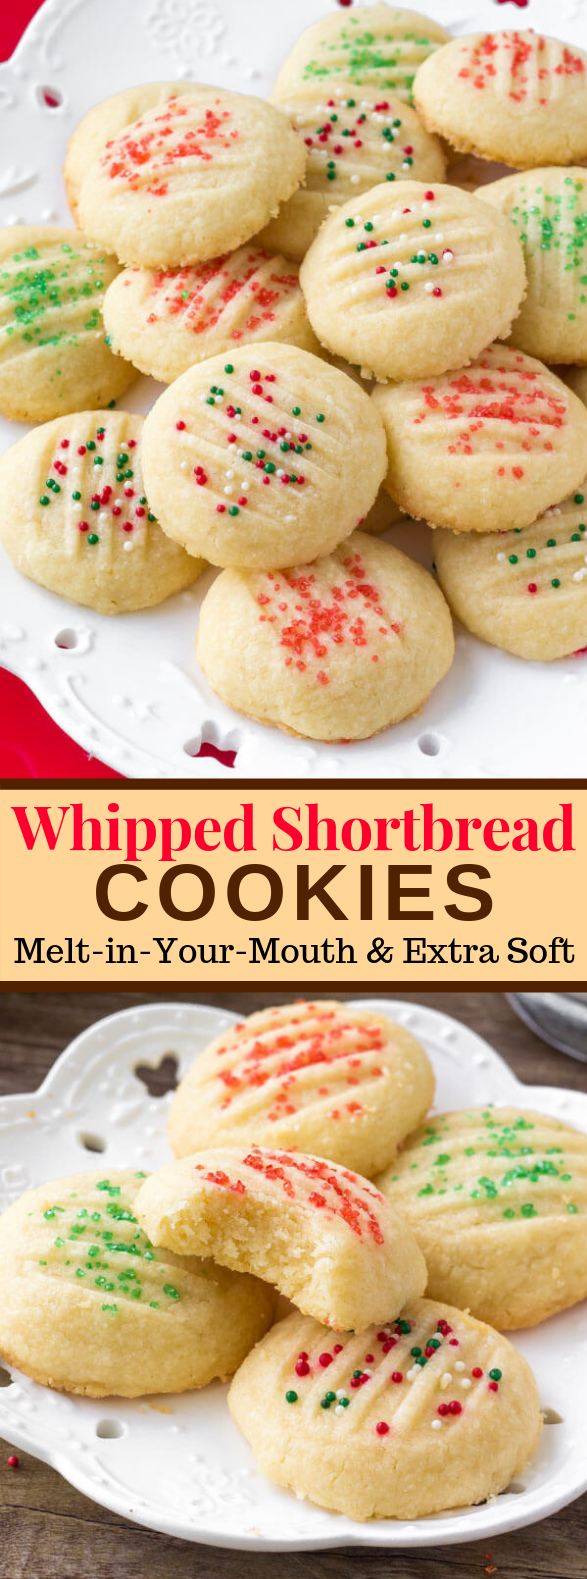 Whipped Shortbread Cookies #dessert #cake